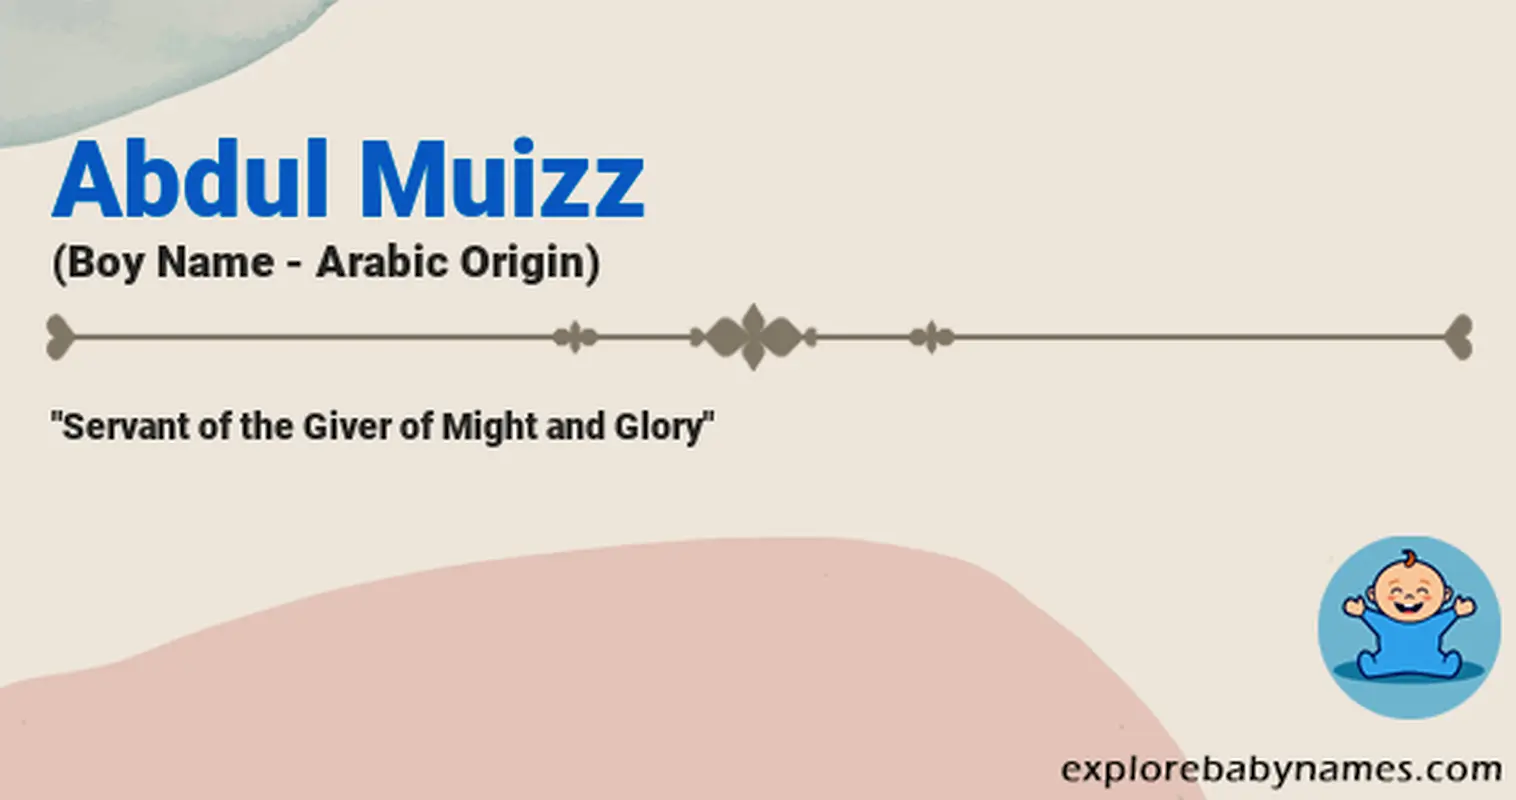 Meaning of Abdul Muizz